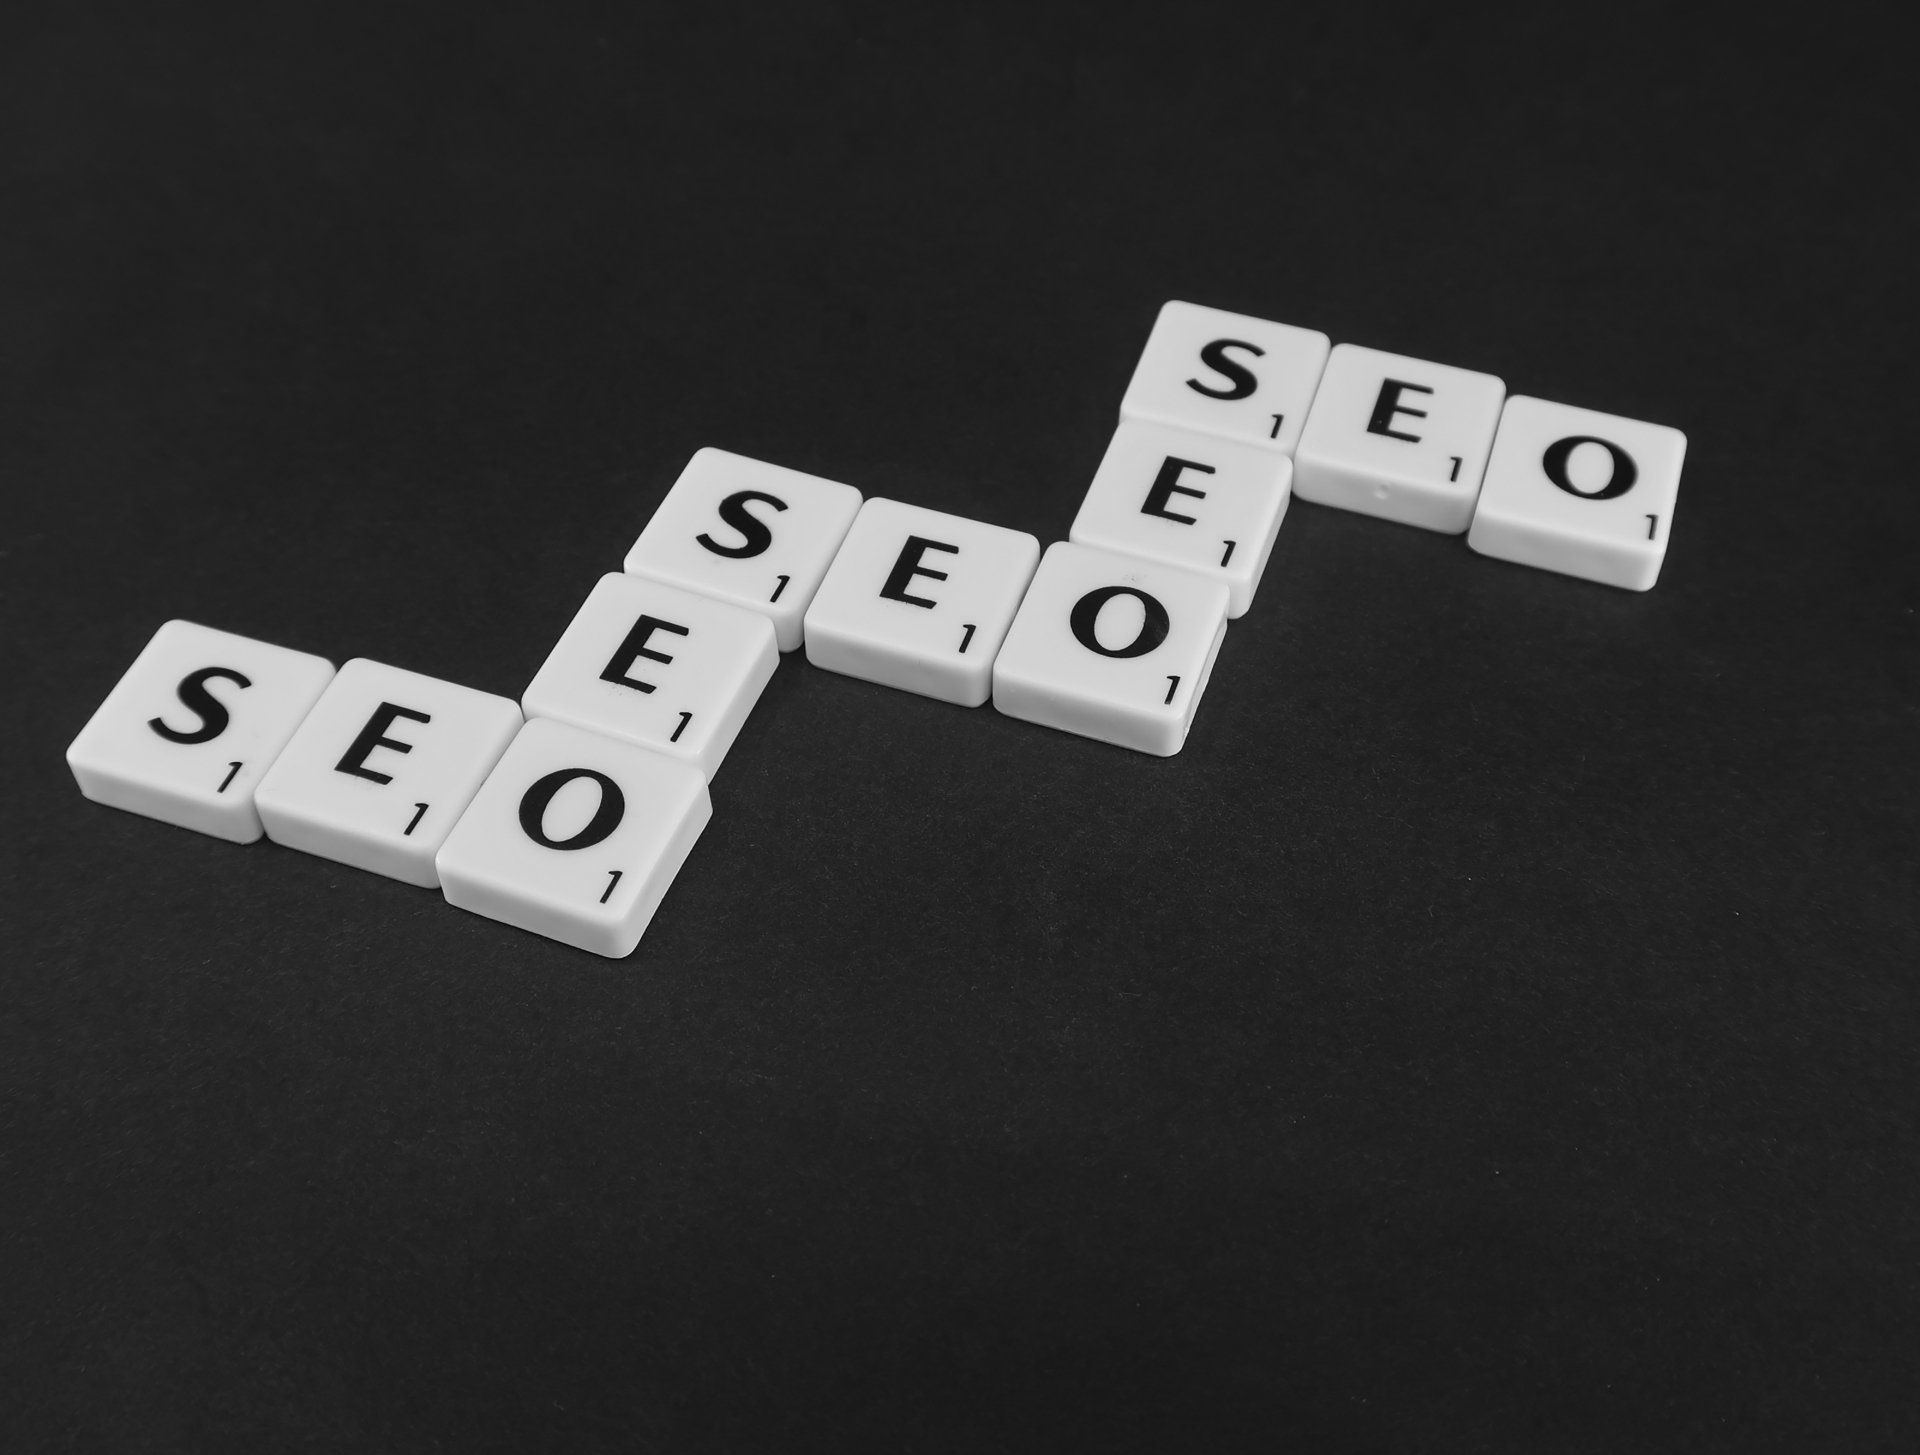 Scrabble tile spelling out SEO for search engine optimization